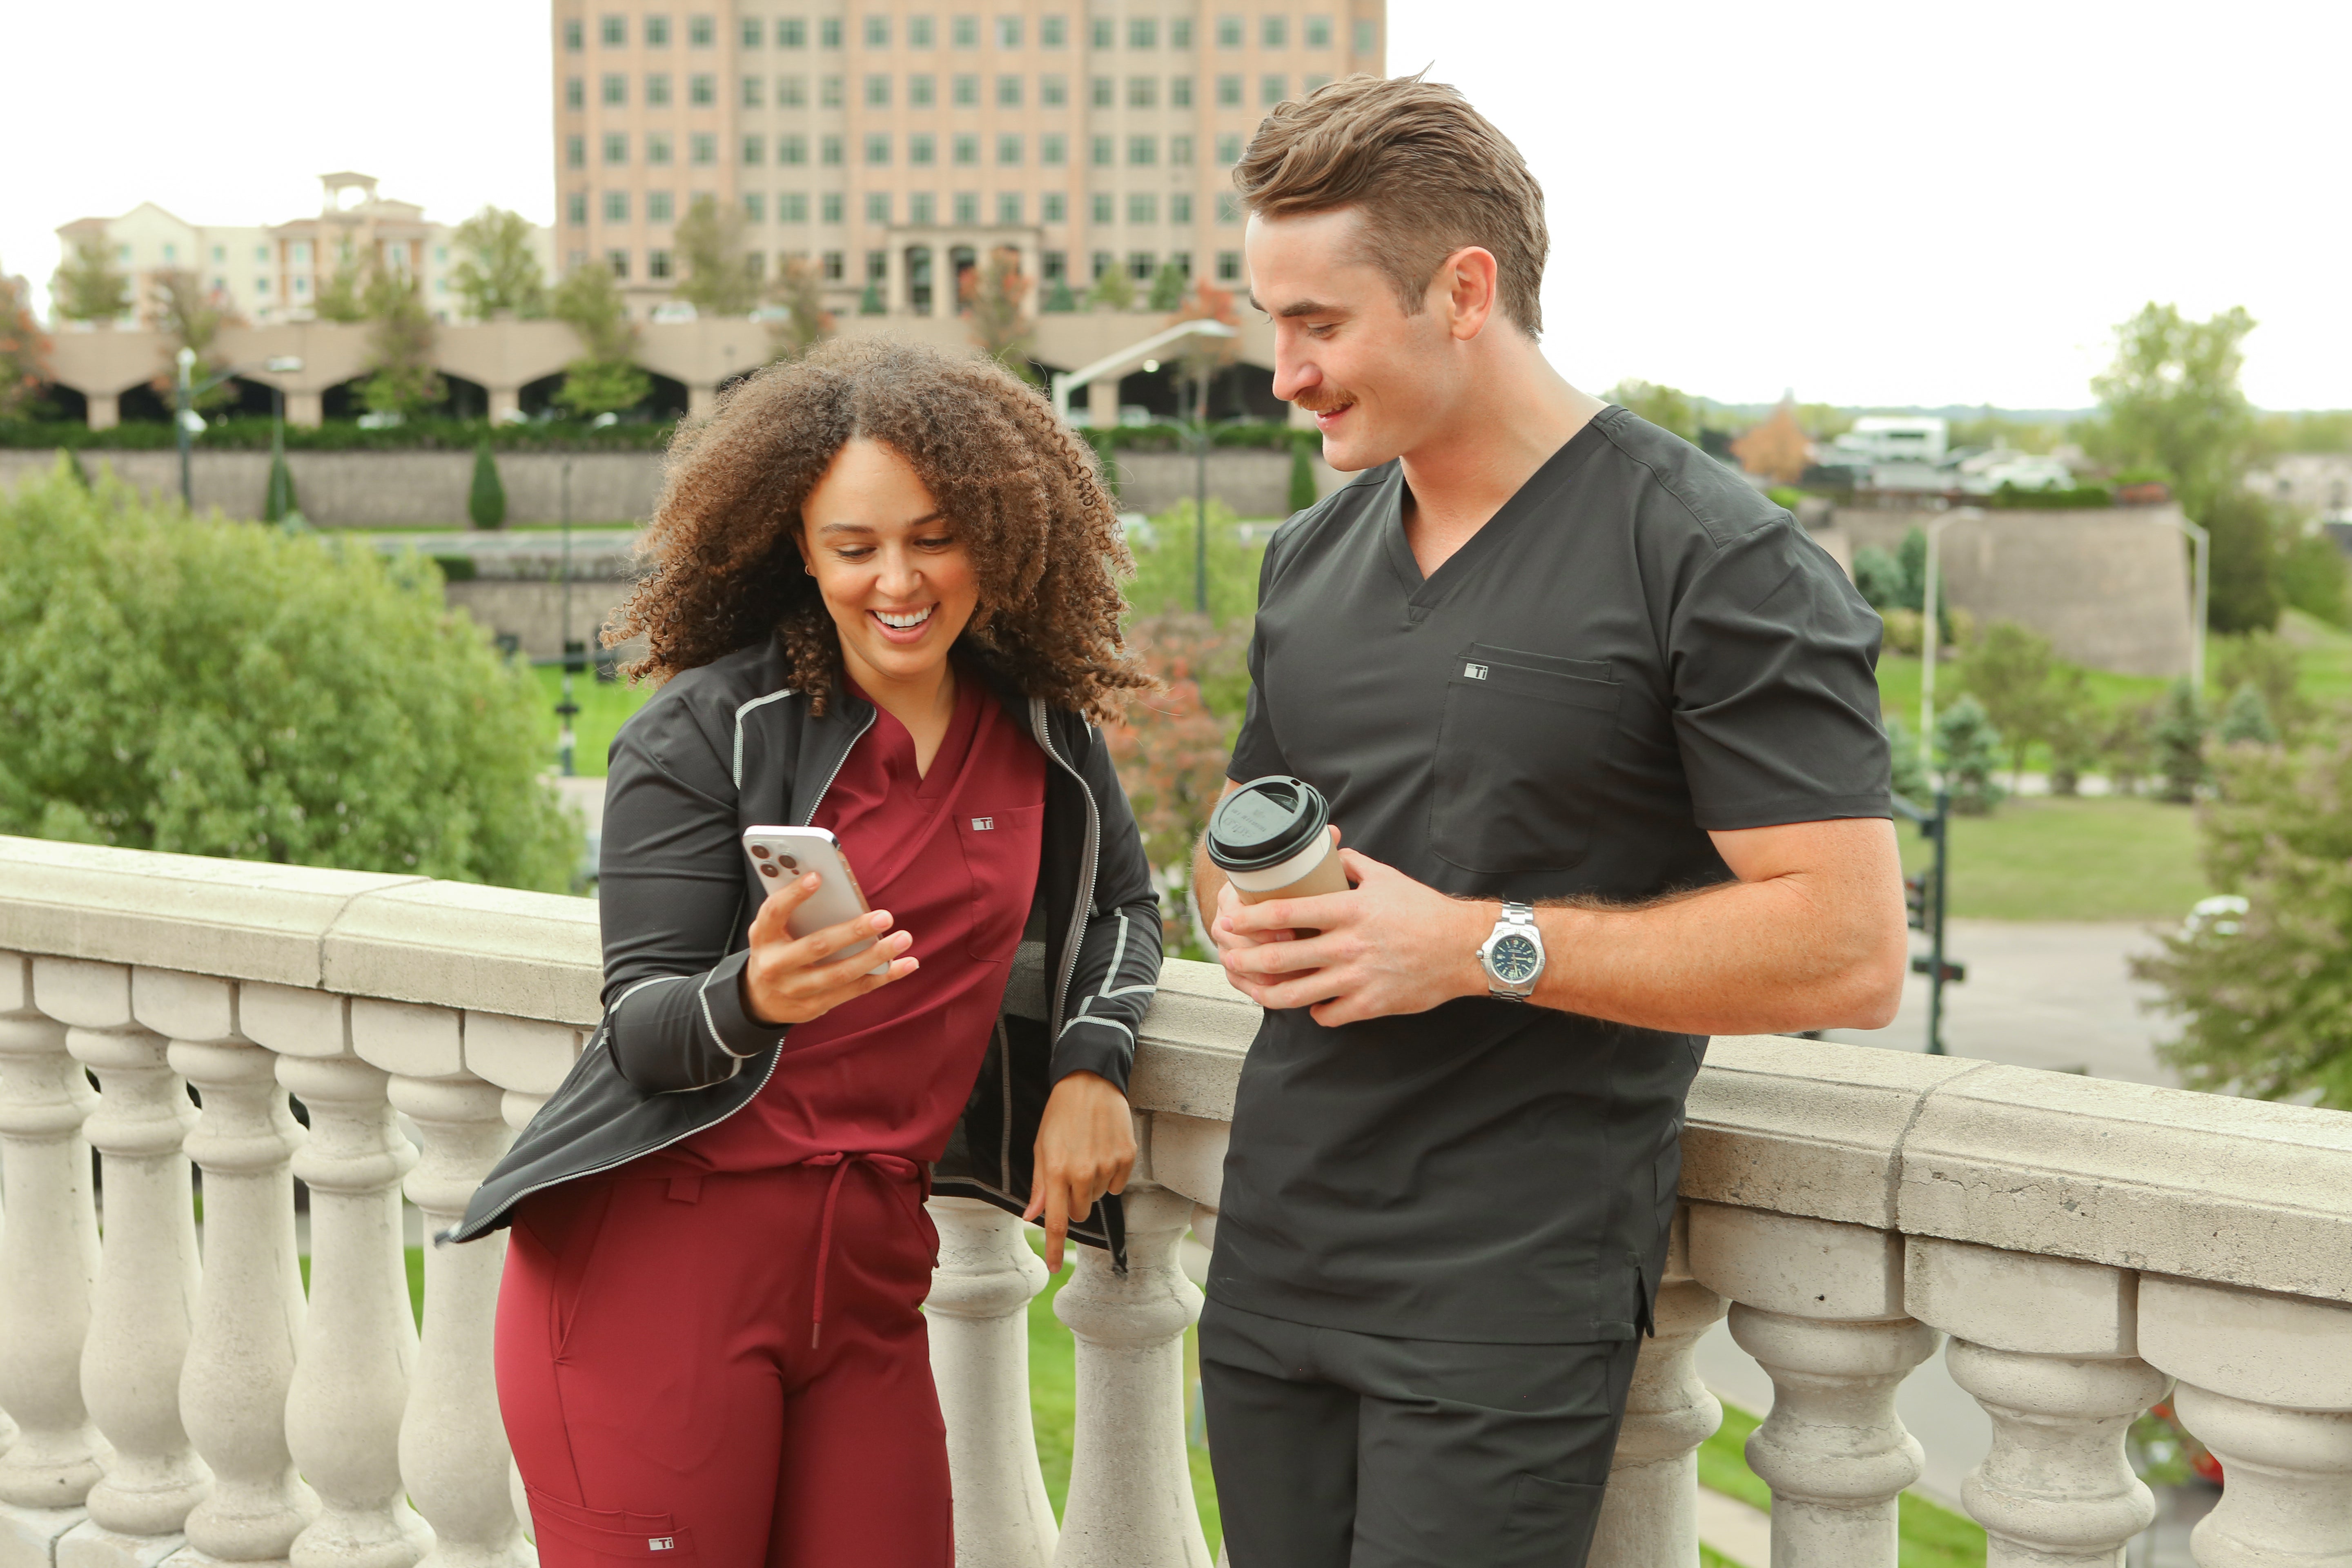 Man and Woman Looking at Phone in Burgundy and Black Scrubs